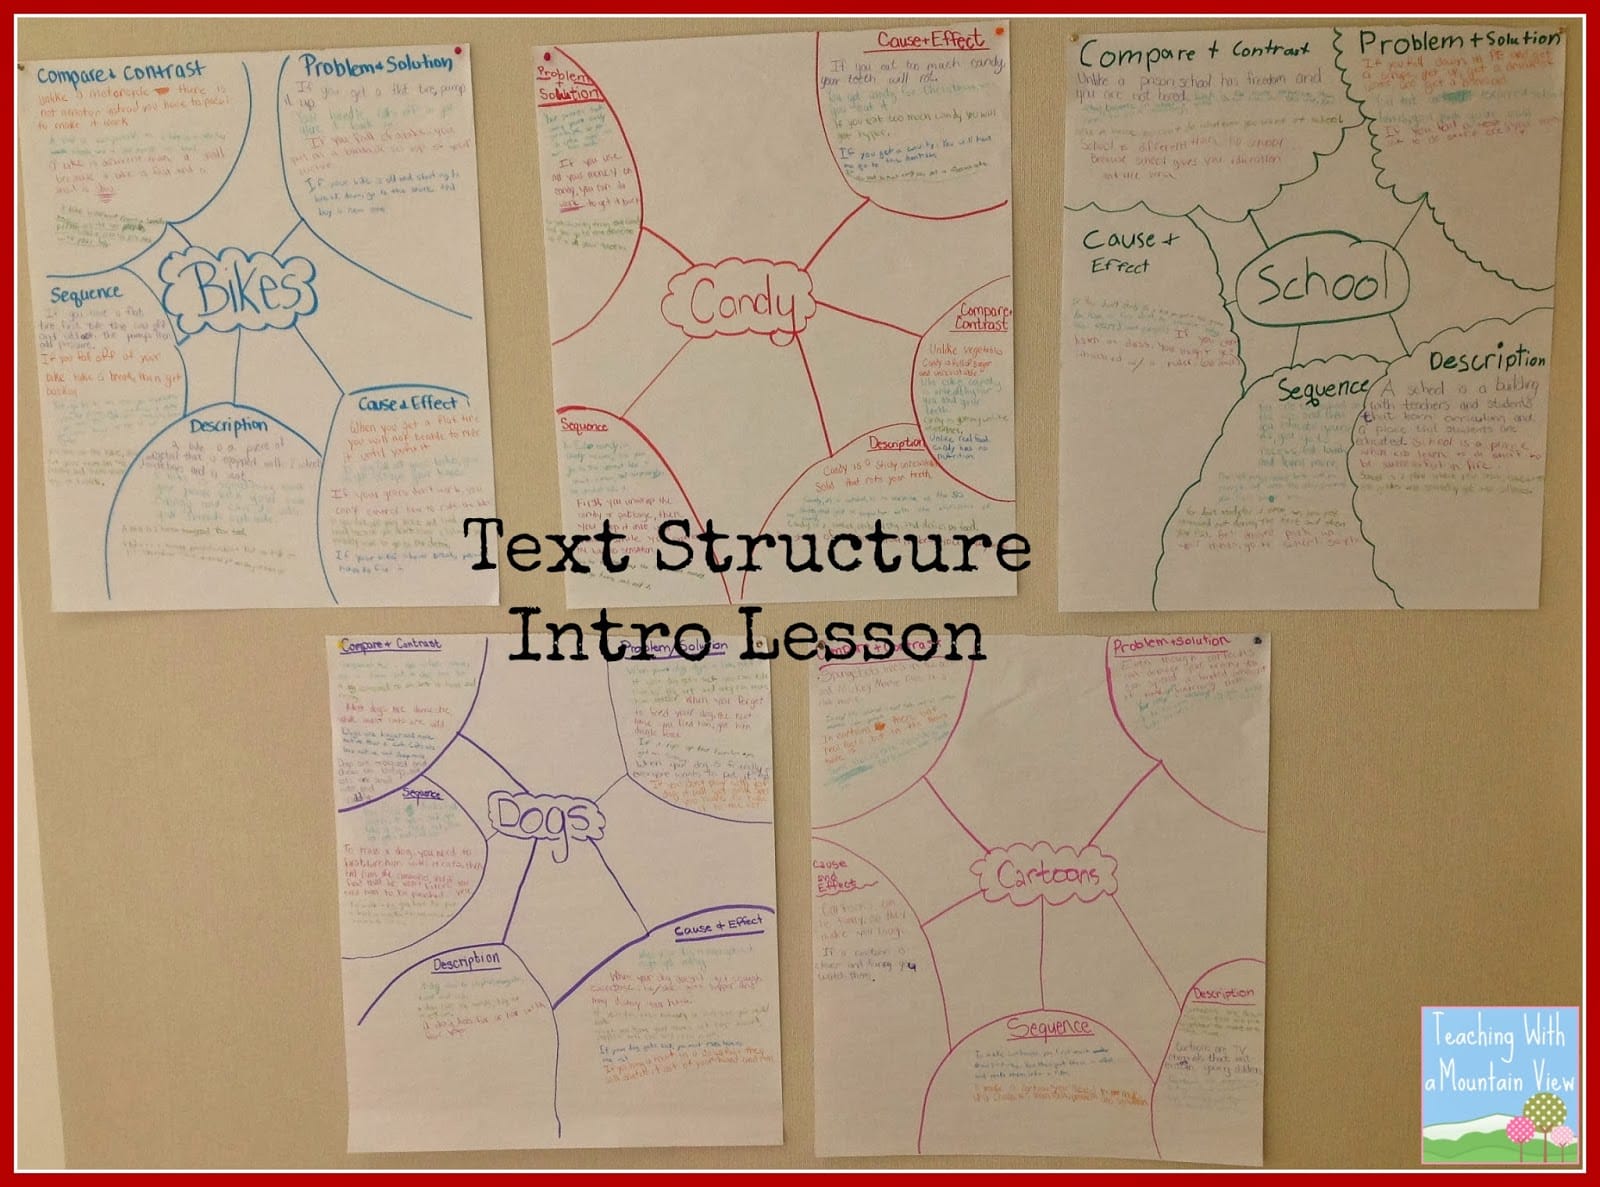 informational text structures introductory lesson upper elementary